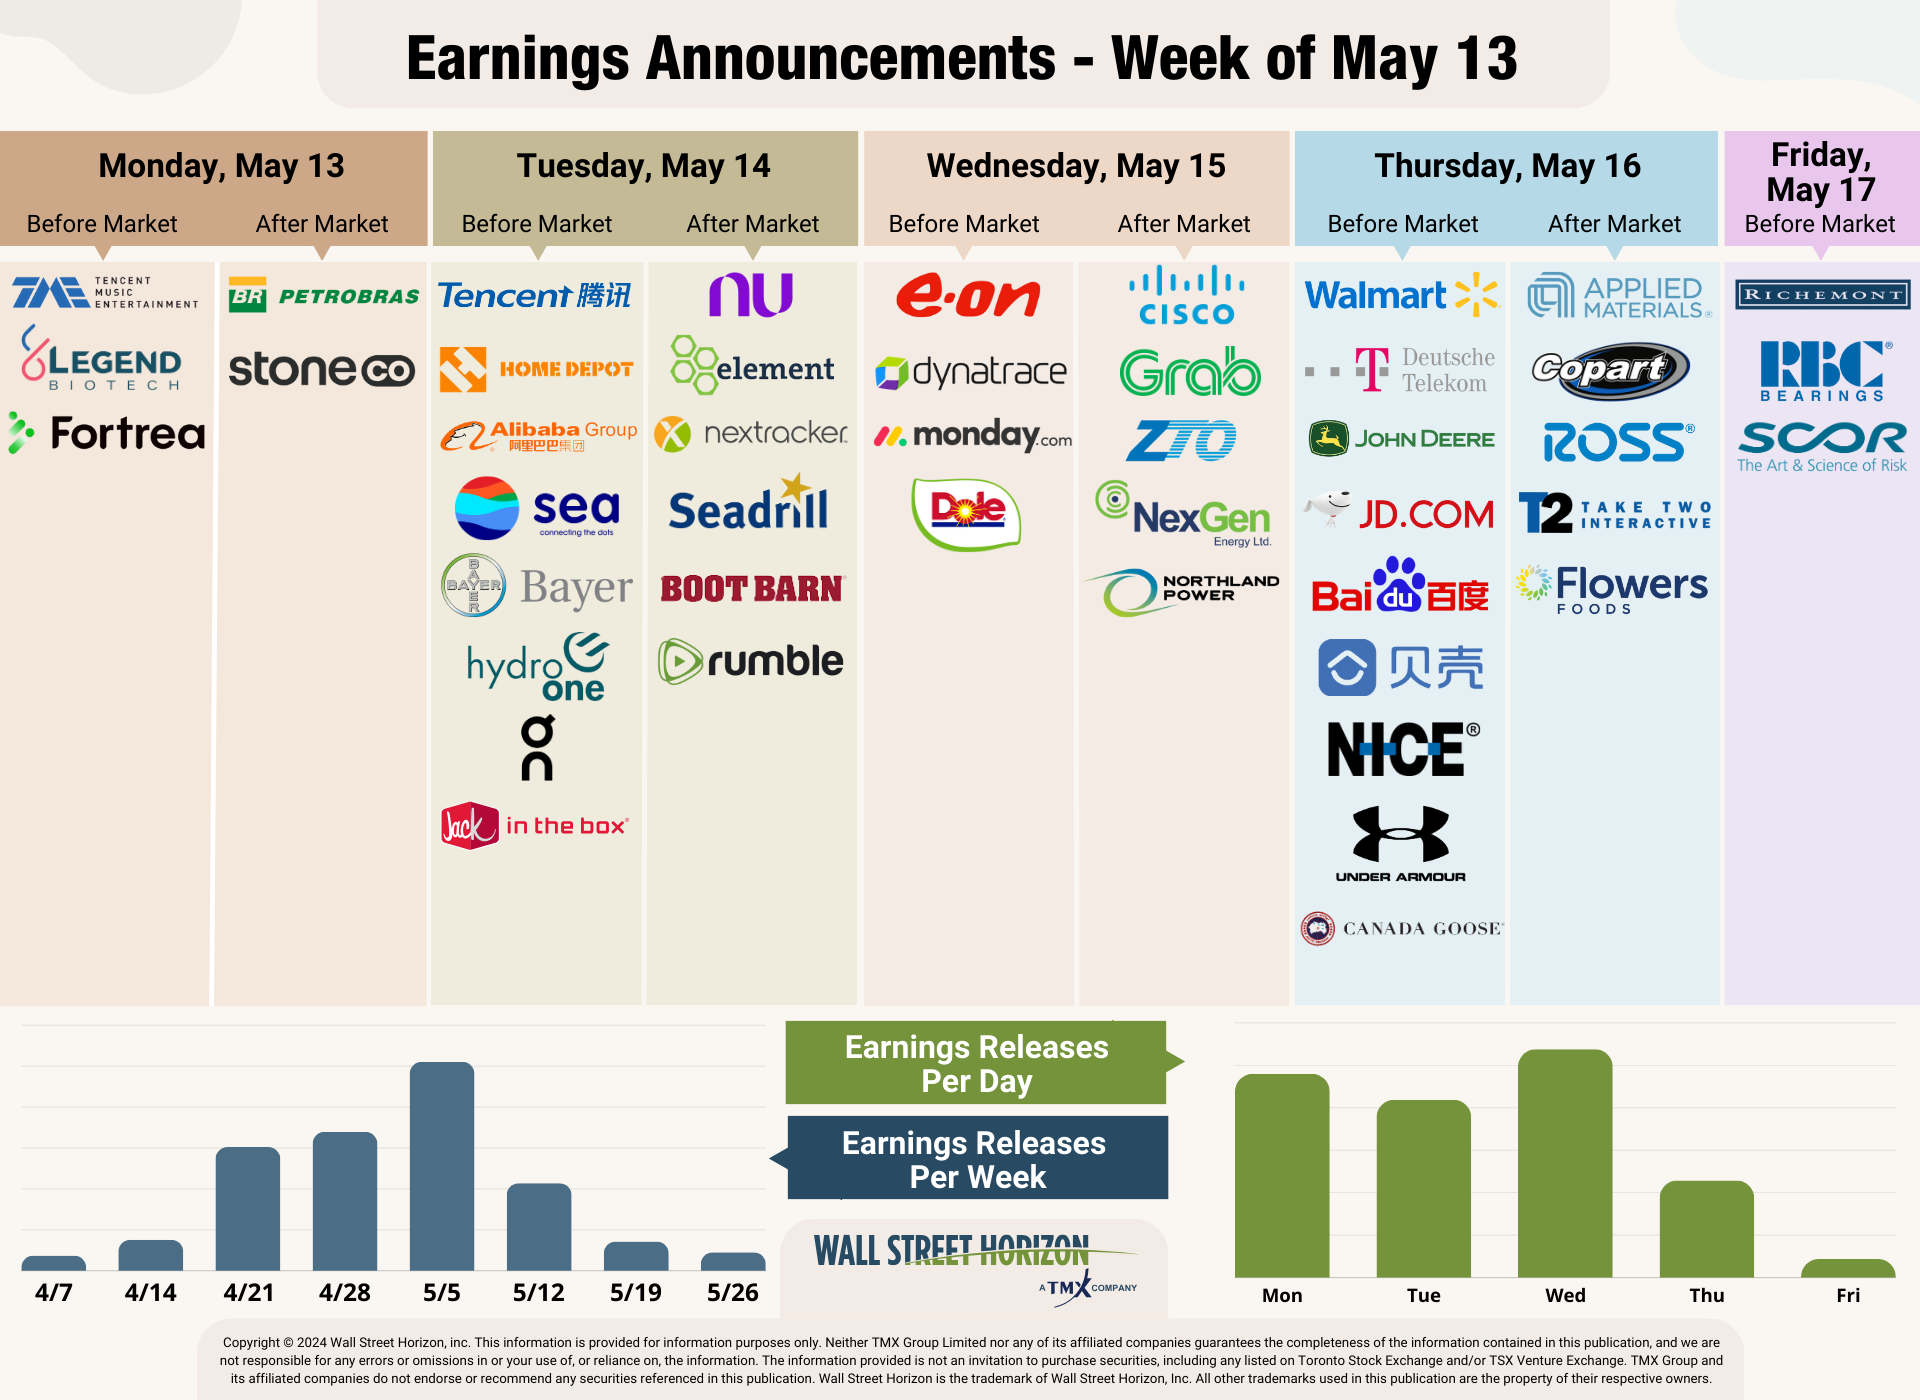 Earnings Announcements For Week of May 13